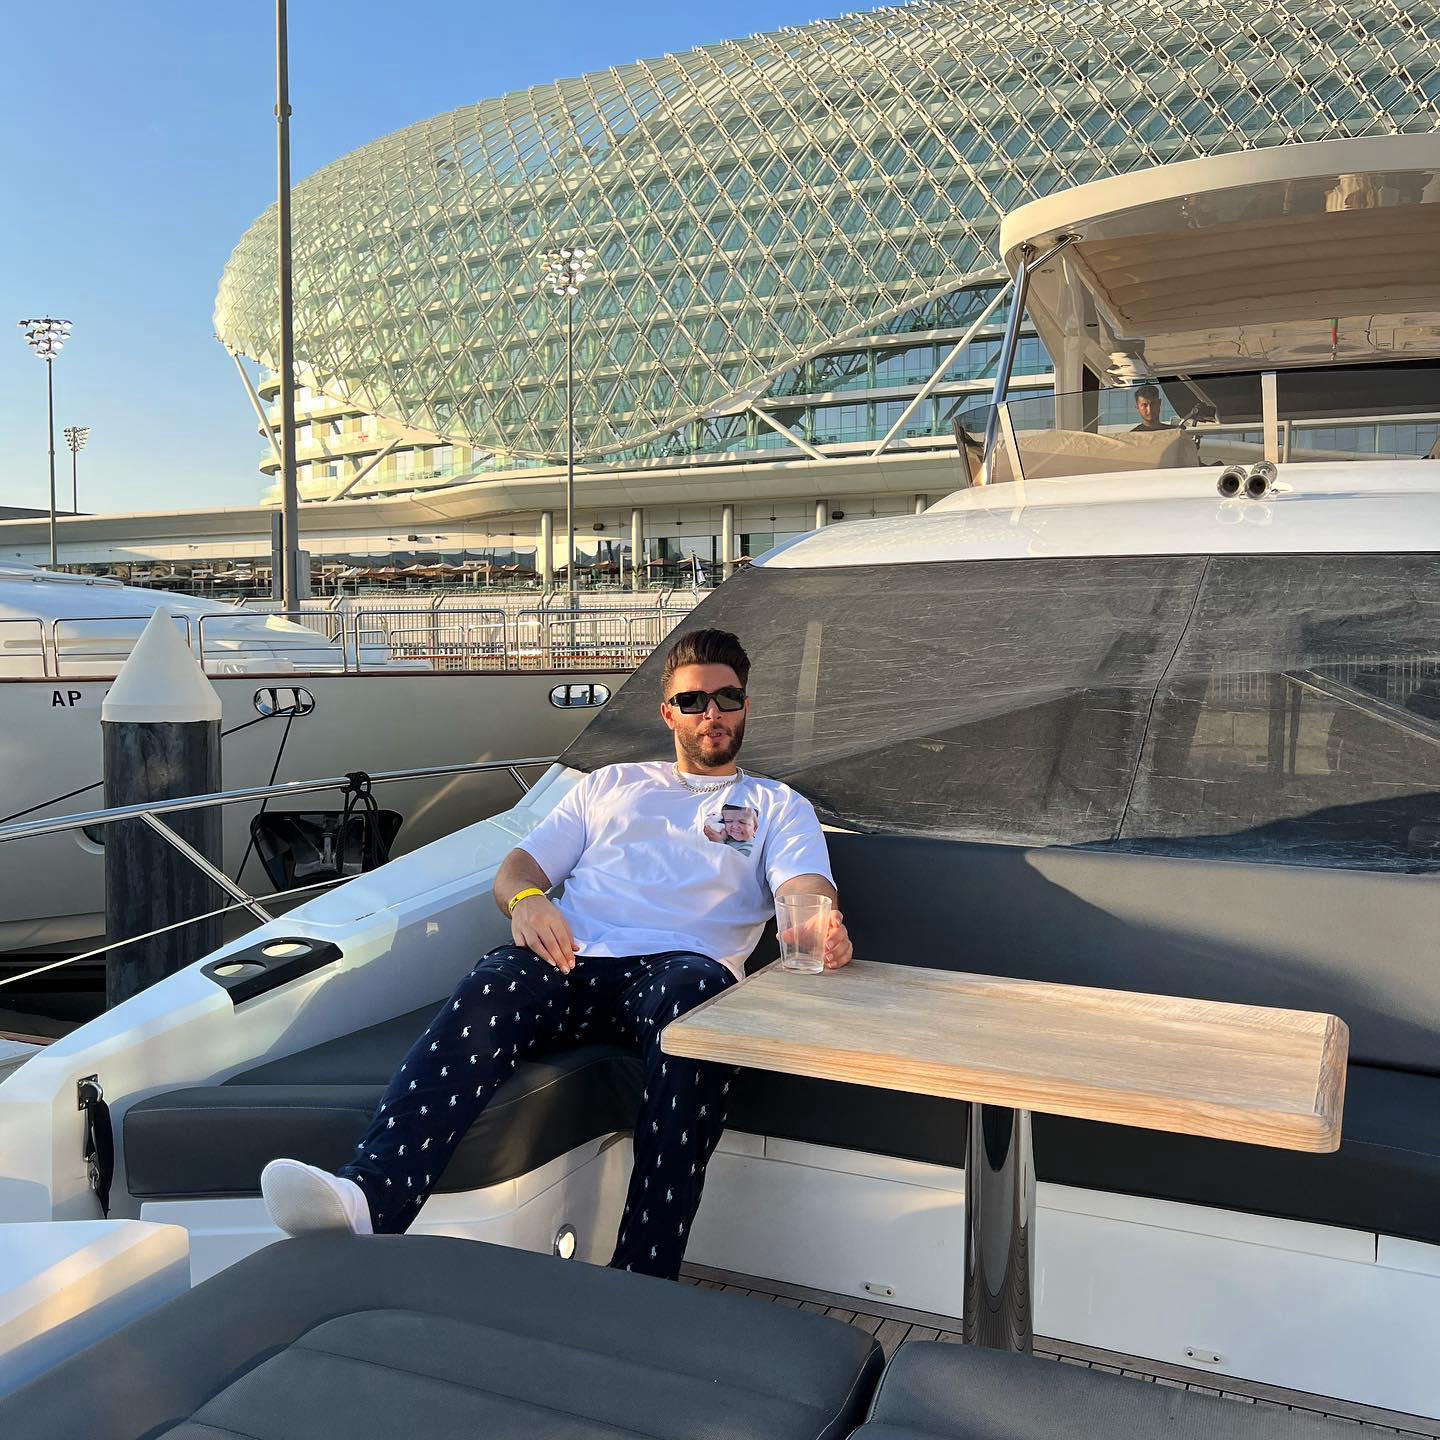 In case you wondering, Yes i hang out in a PJ on a yacht, yes, I don’t give a F anymore